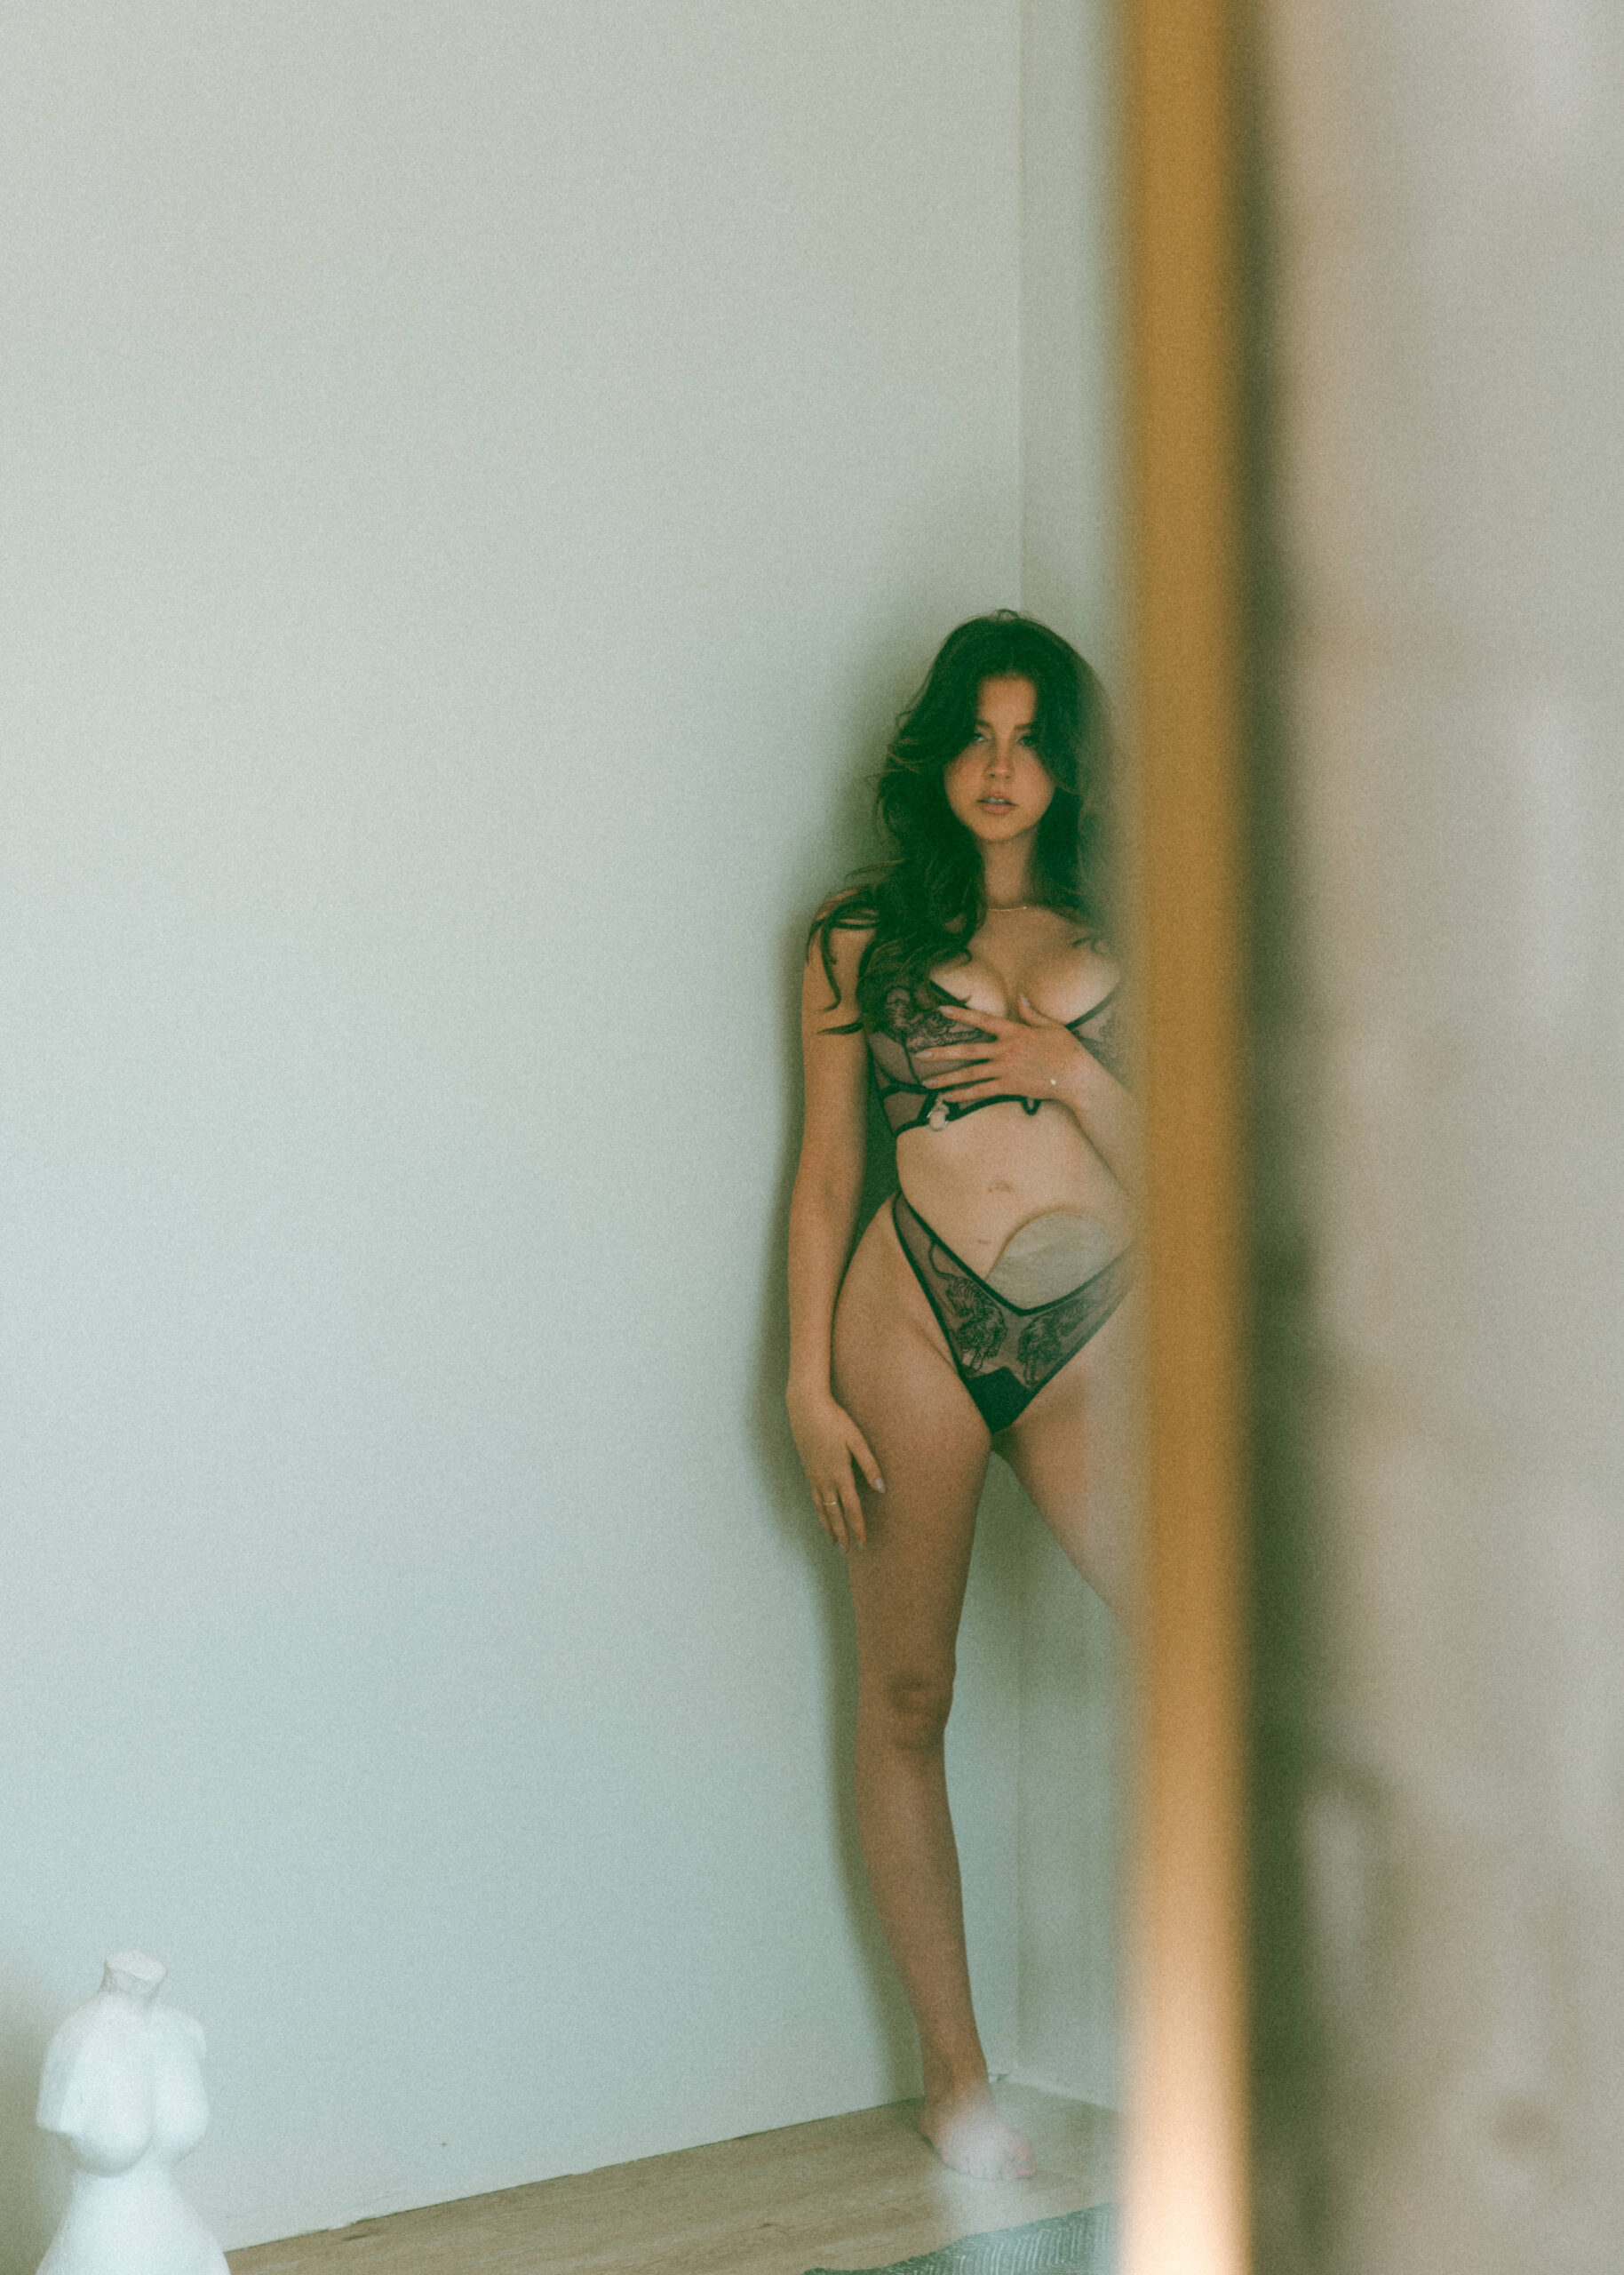 a woman in lingerie in the mirror reflection showing what is a boudoir photoshoot